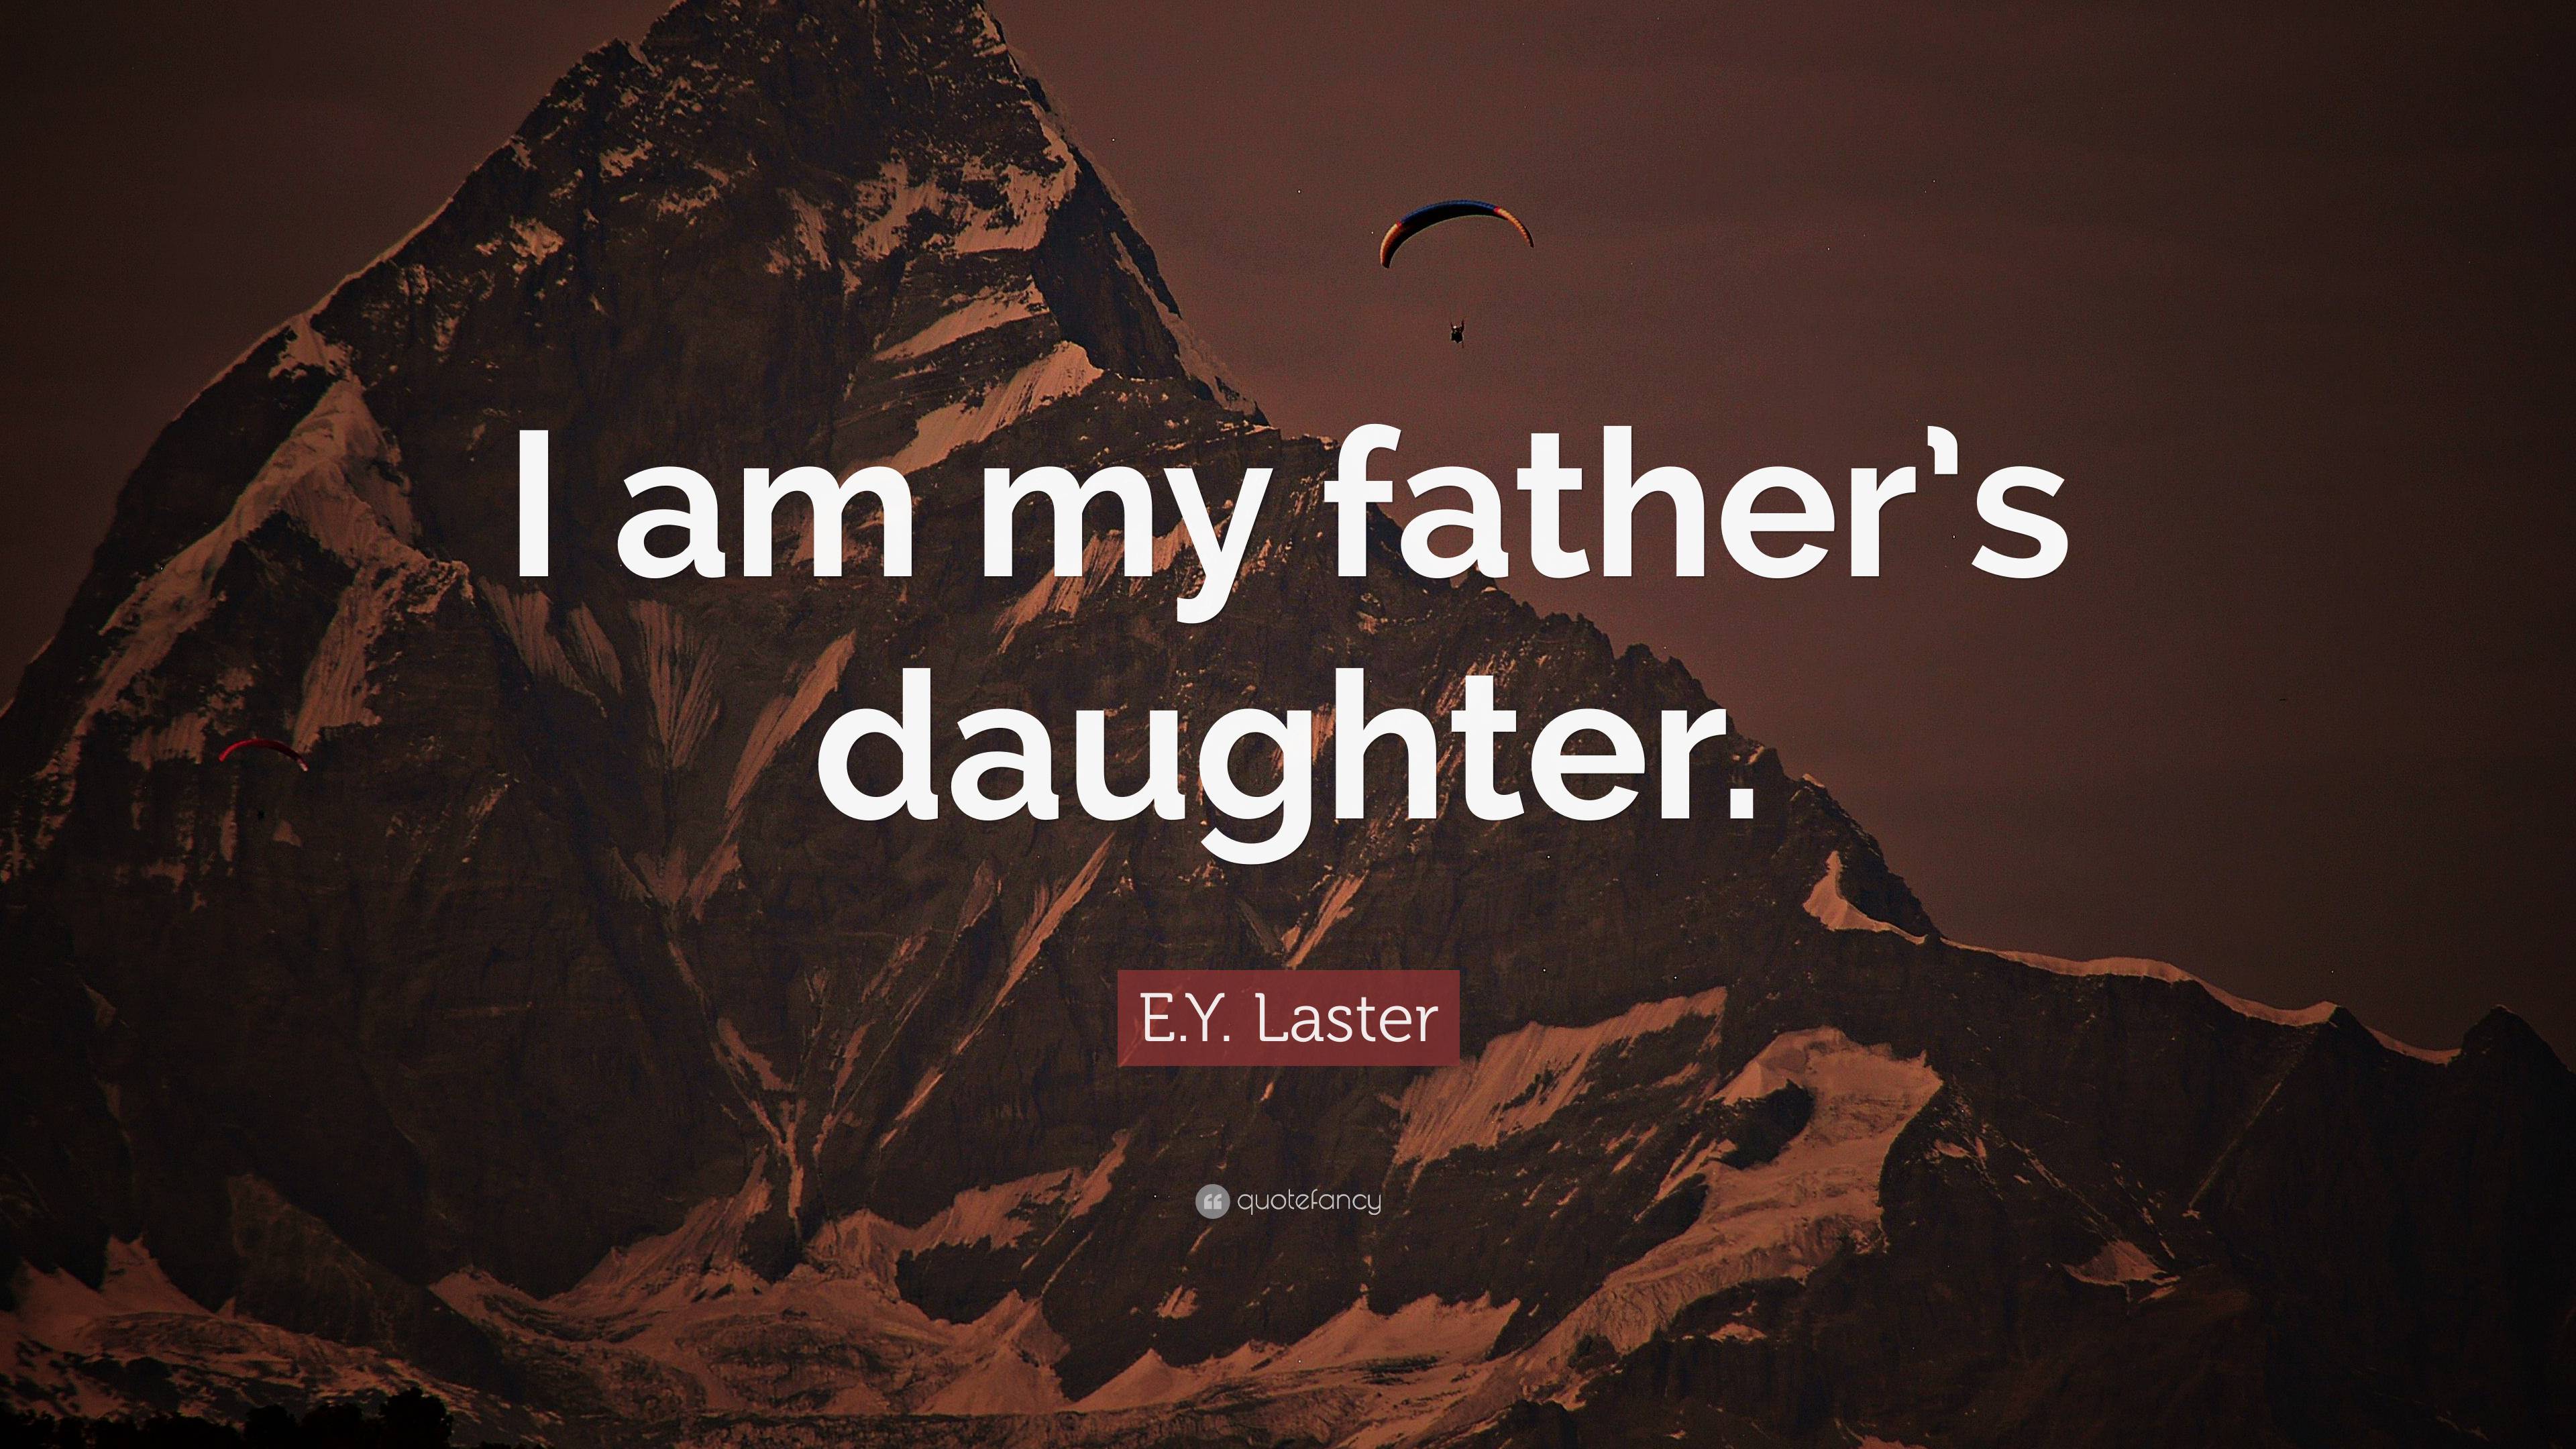 50 Father Daughter Quotes in Hindi  पप बट पर अनमल वचन व सवचर